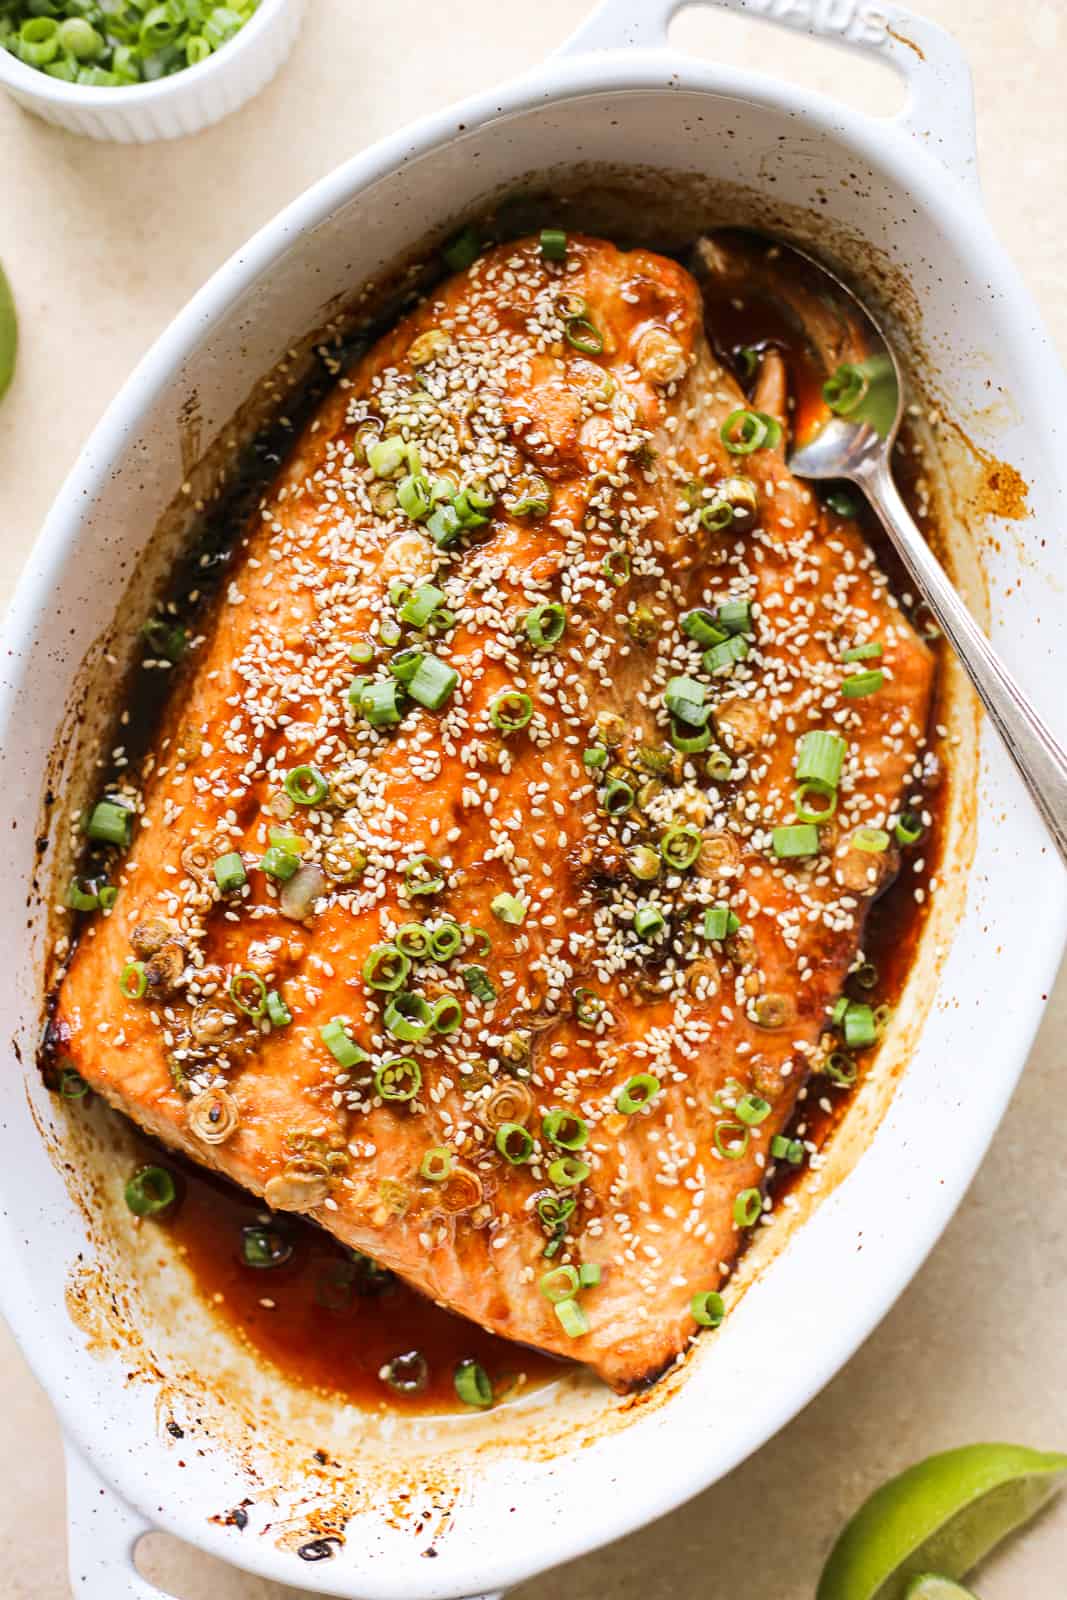 Large salmon filet in white oval baking dish covered in marinade, sesame seeds, and sliced green onions.